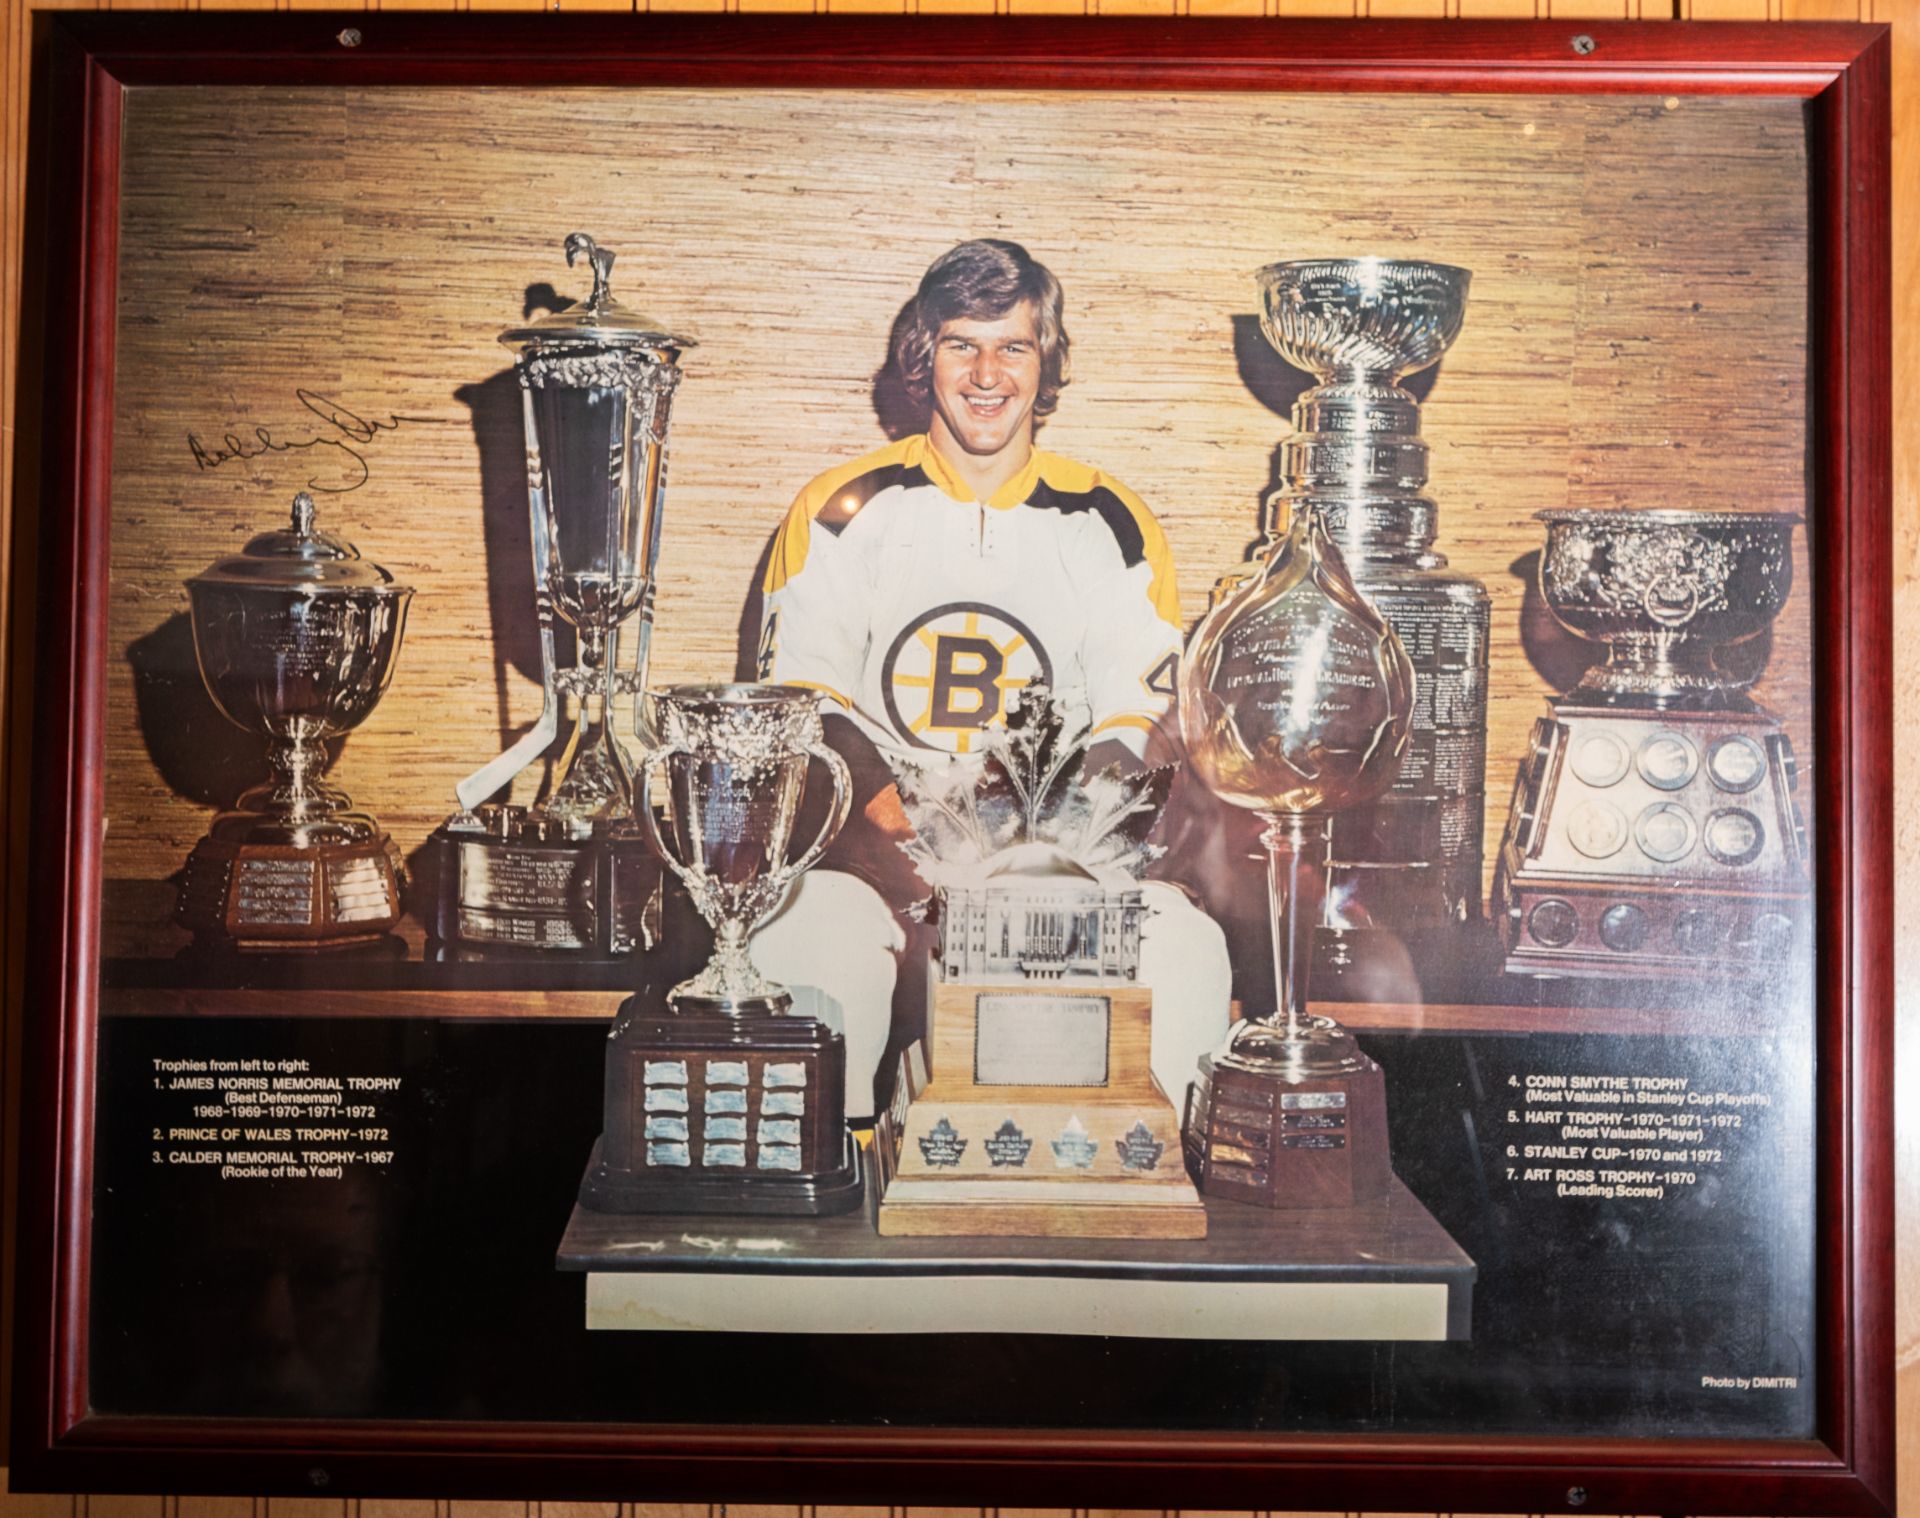 Bobby Orr w/ 7 Trophy's Photo Signed "Bobby Orr", Trophy's in Picture Include Norris, Wales, Calder,